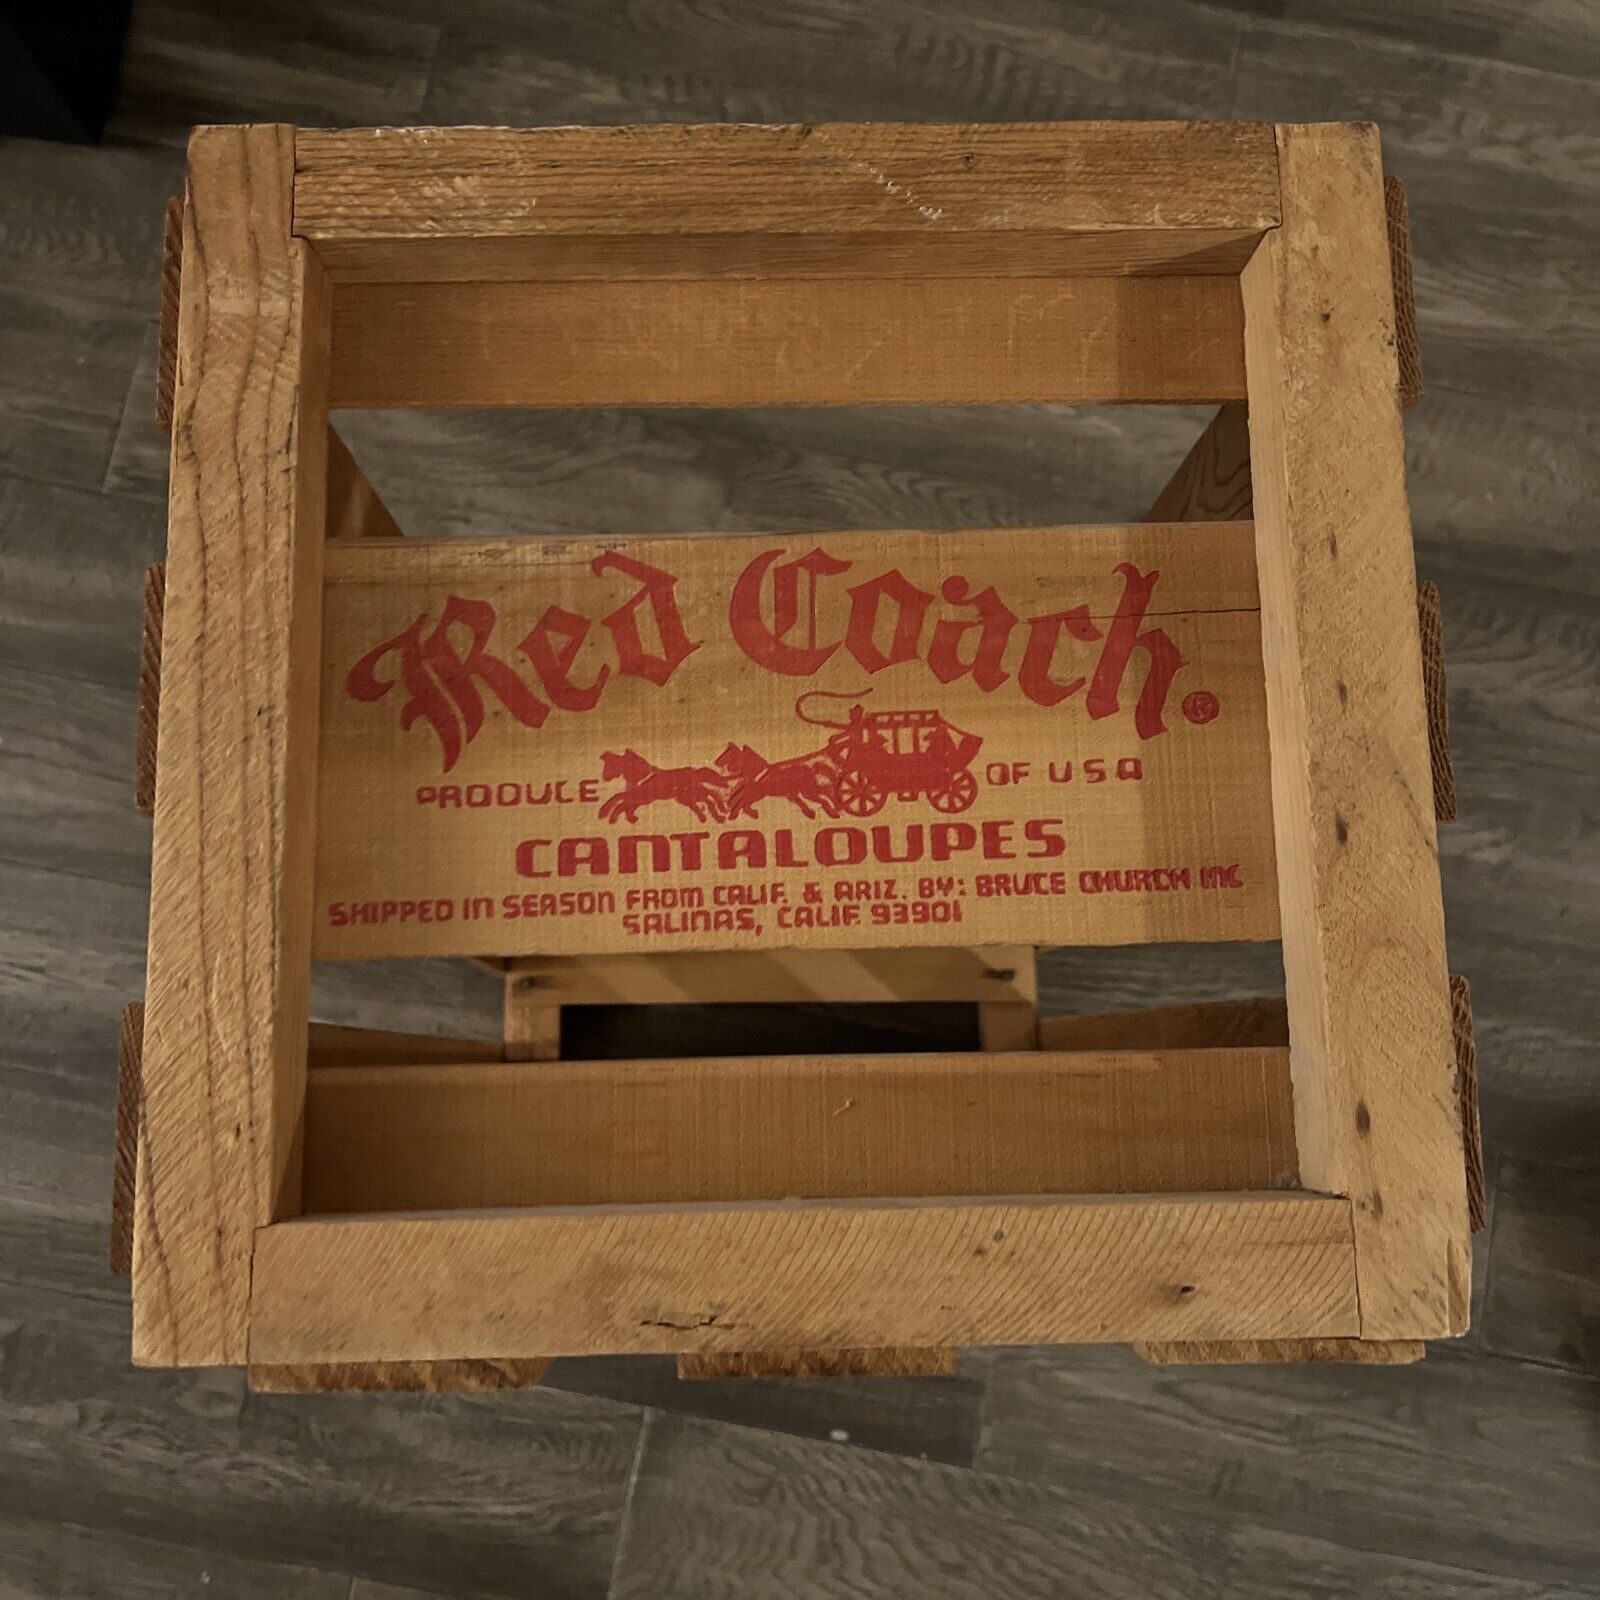 RARE RED COACH CANTALOUPES VTG WOOD SHIPPING CRATE FRUIT LABEL BOX ADVERTISING